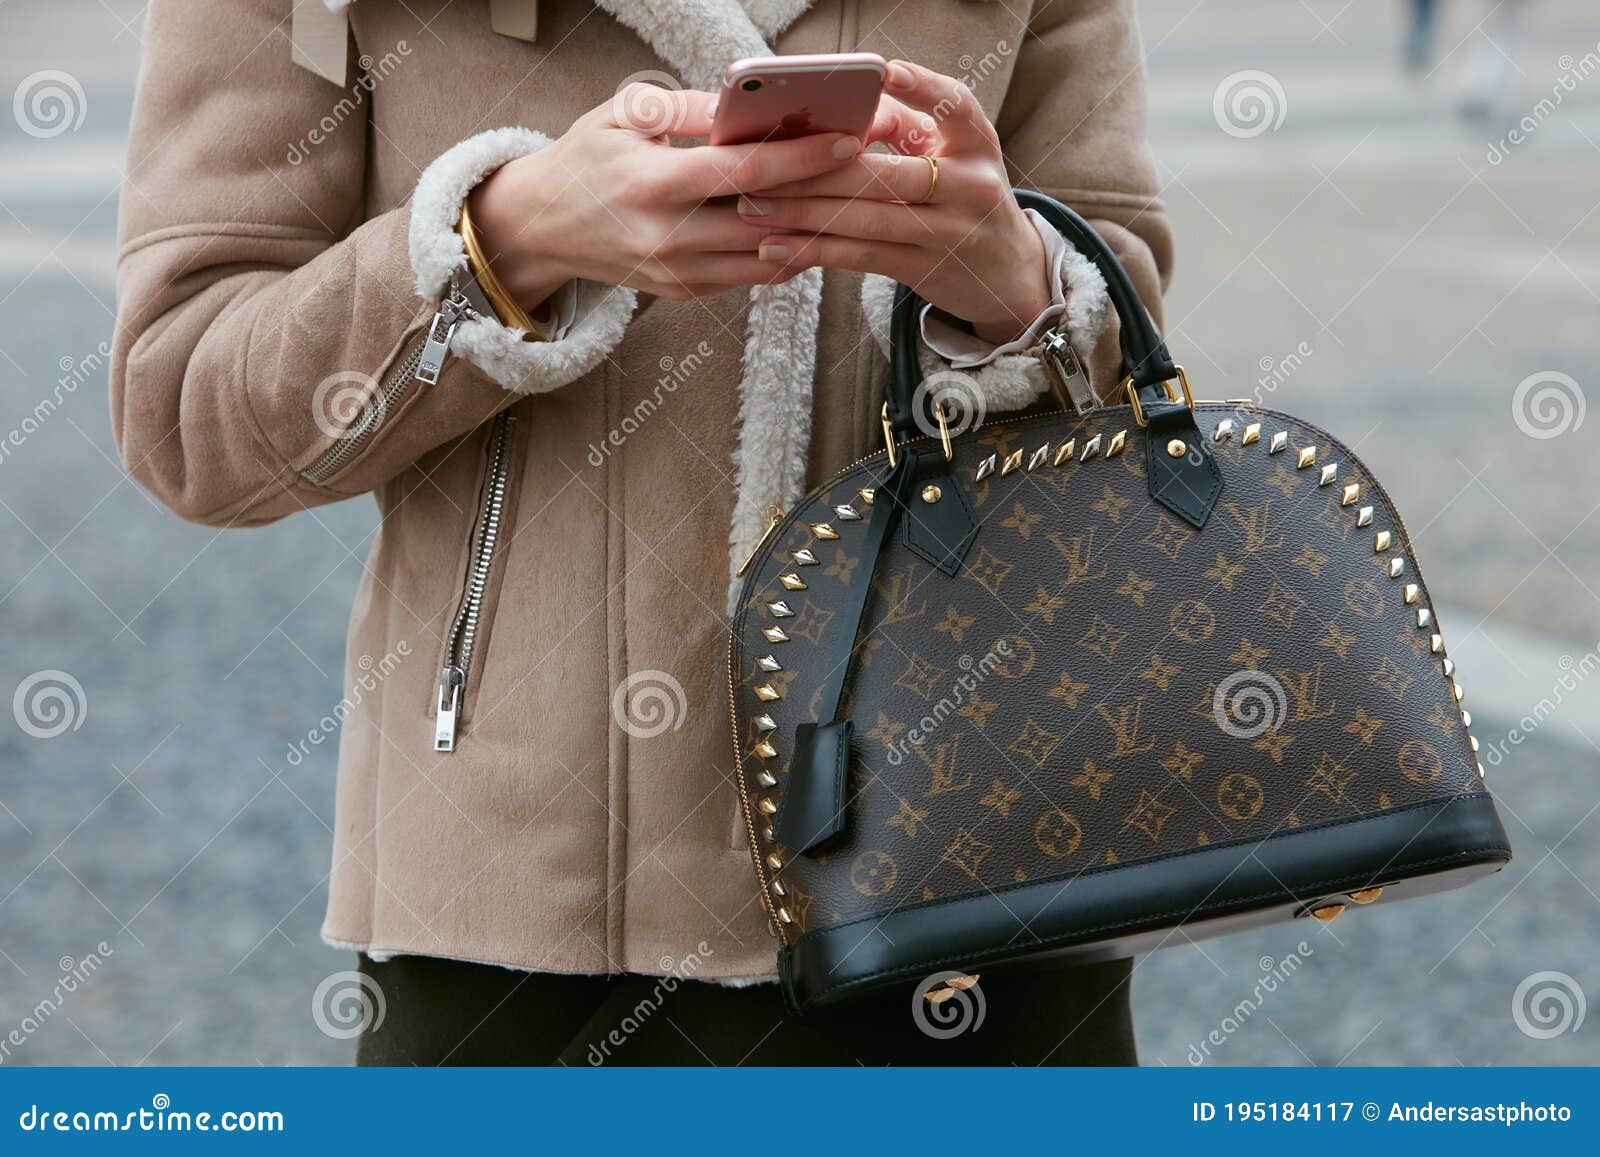 Woman with Louis Vuitton Bag and Beige Coat before Cristiano